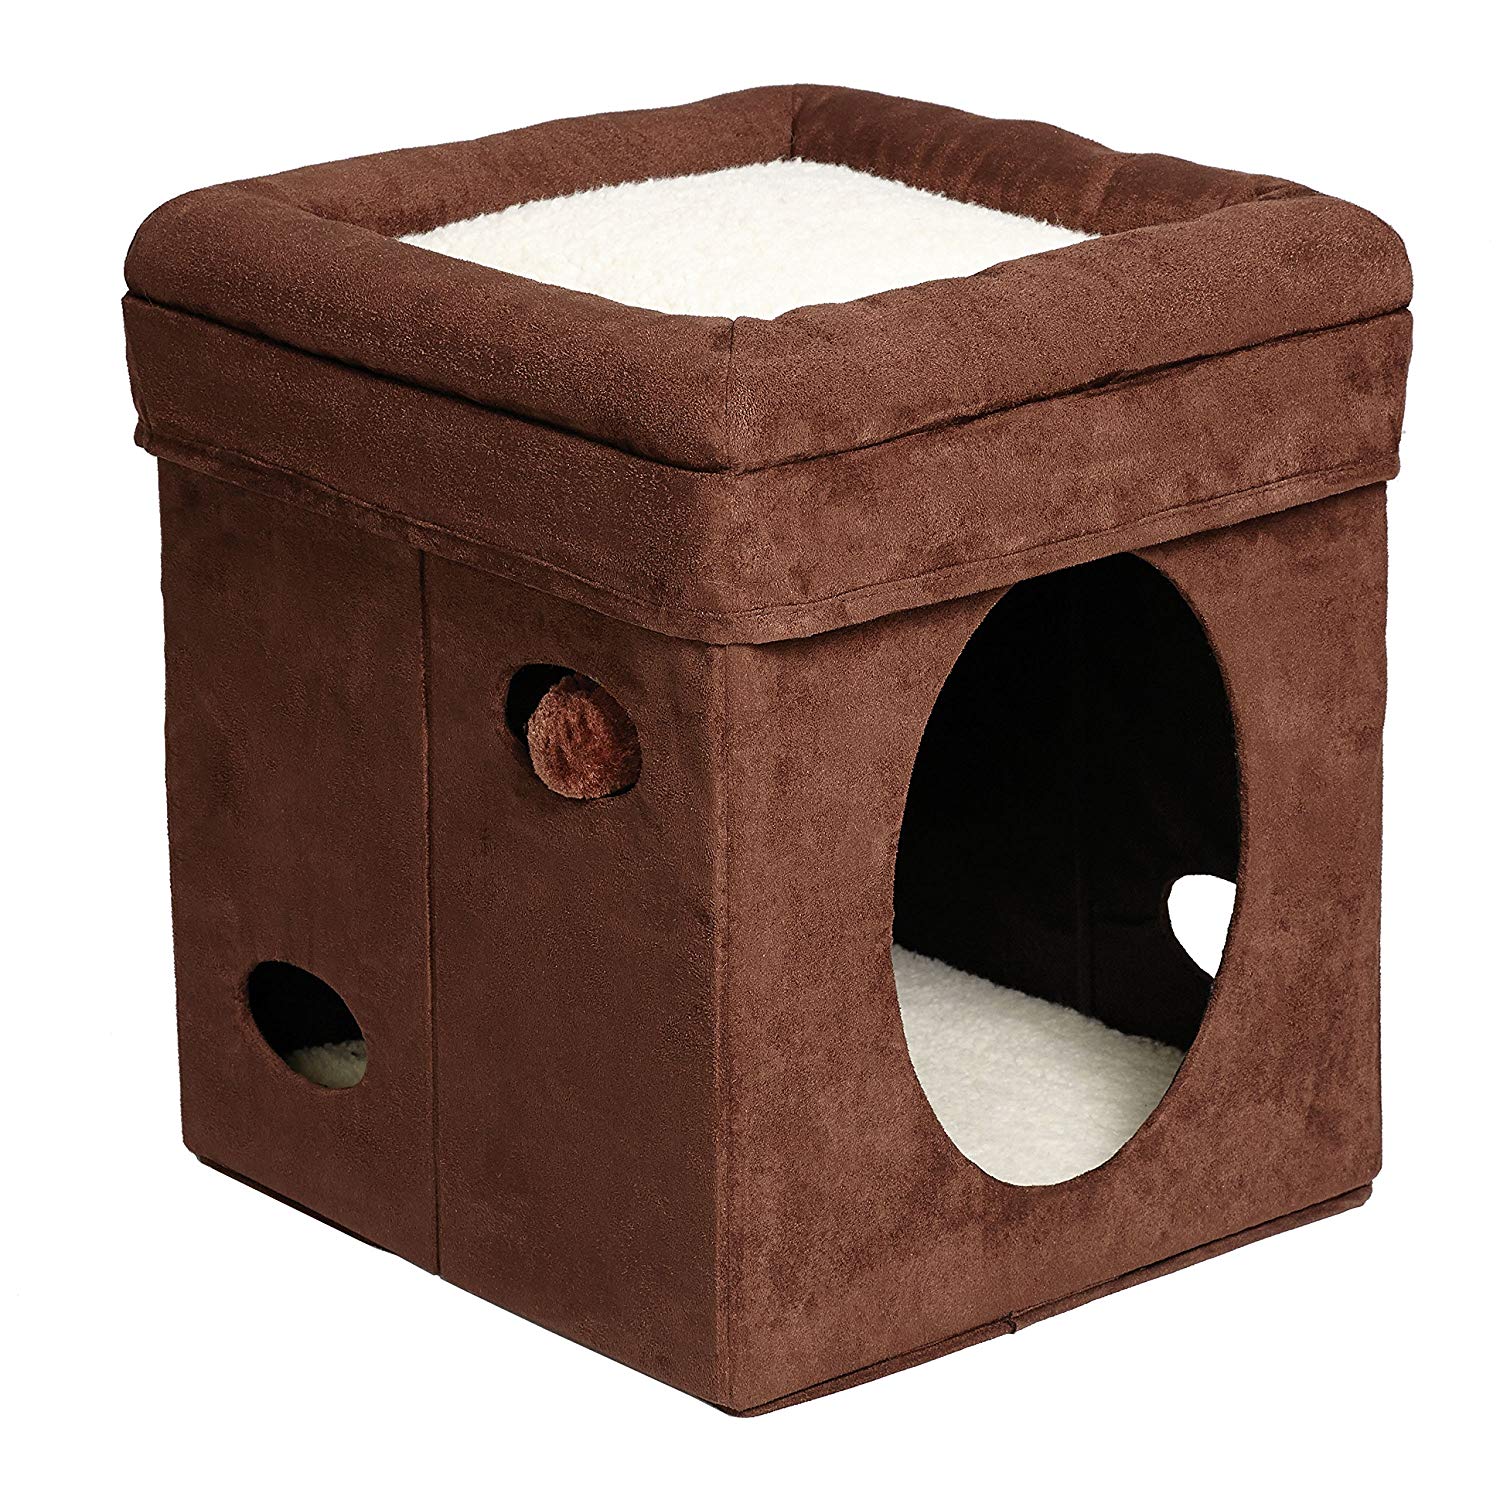 MidWest-Homes-for-Pets-Curious-Cat-Cube-Brown-Suede